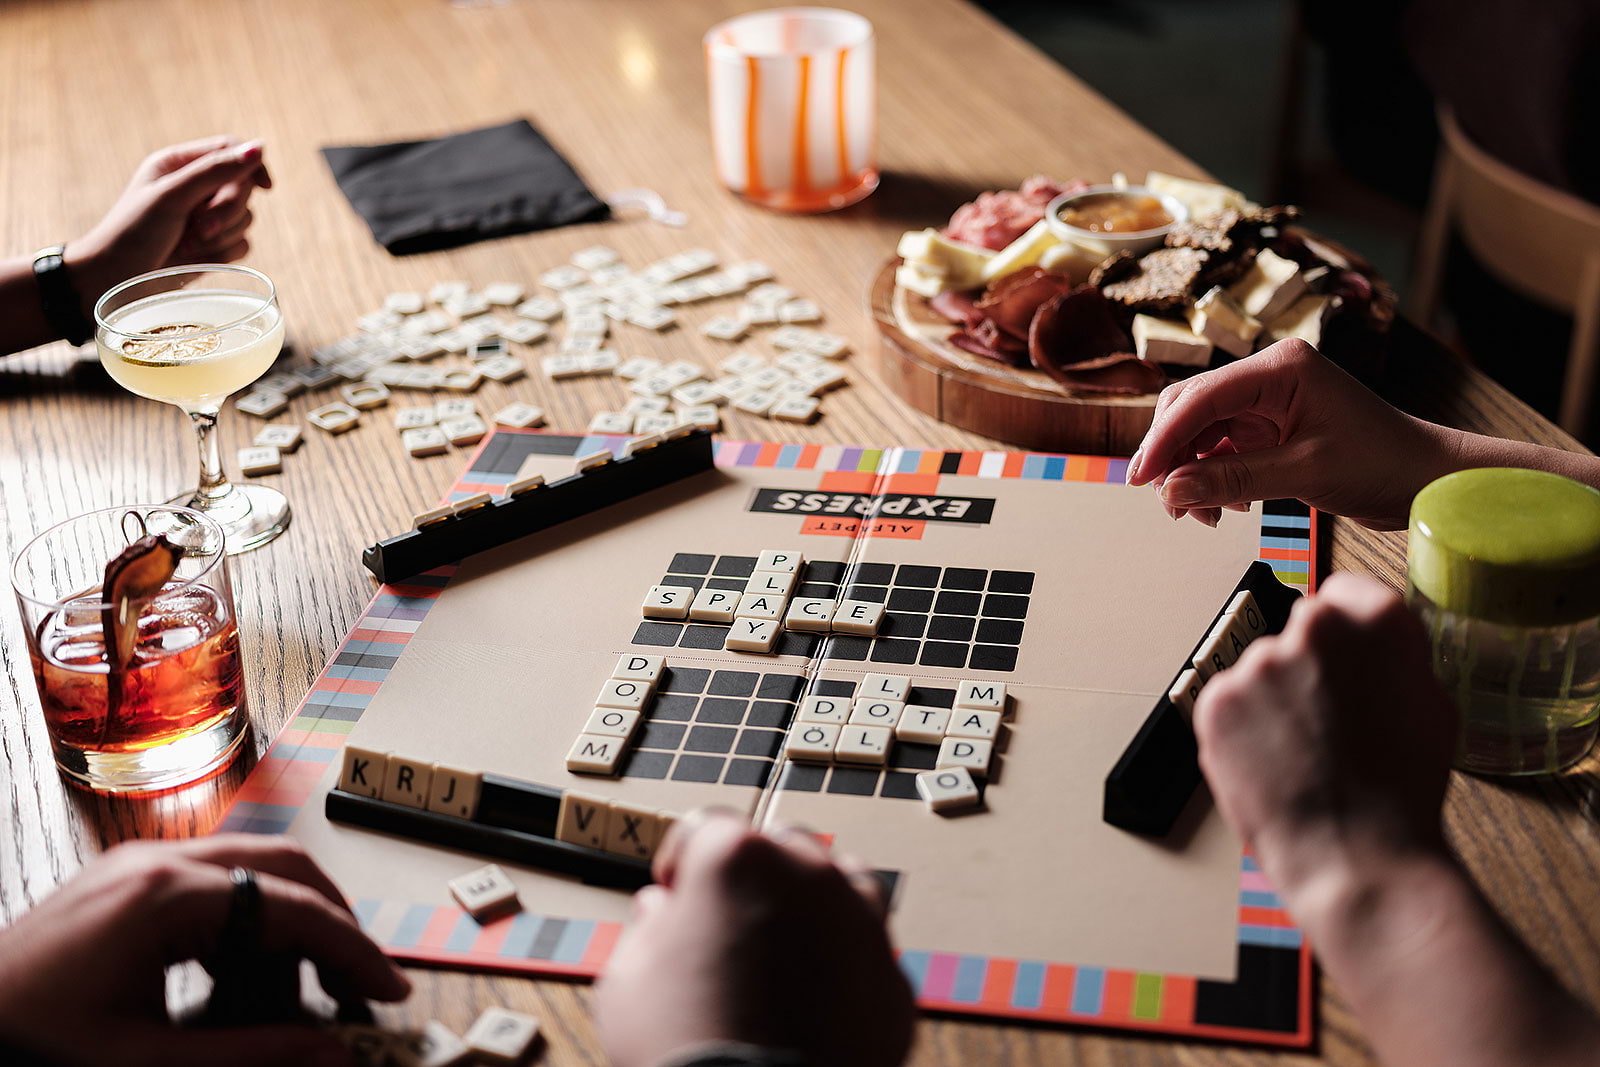 Where to play board games in London